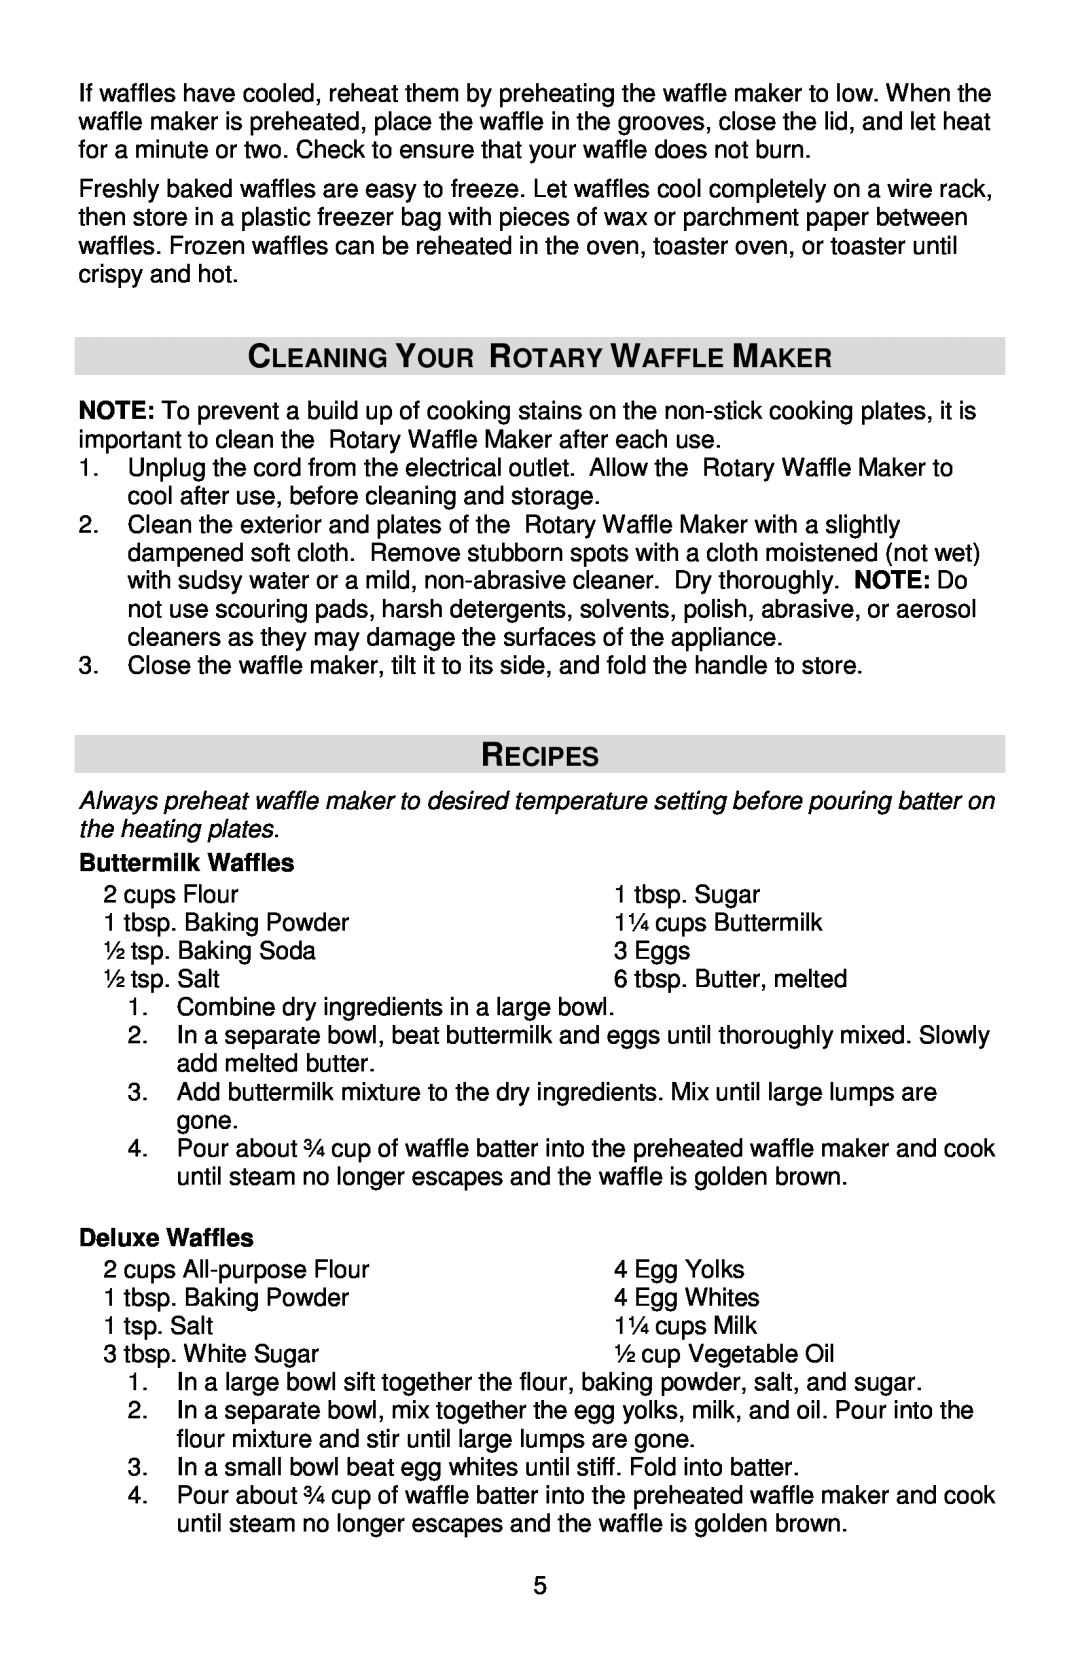 West Bend 6201 instruction manual Cleaning Your Rotary Waffle Maker, Recipes, Buttermilk Waffles, Deluxe Waffles 